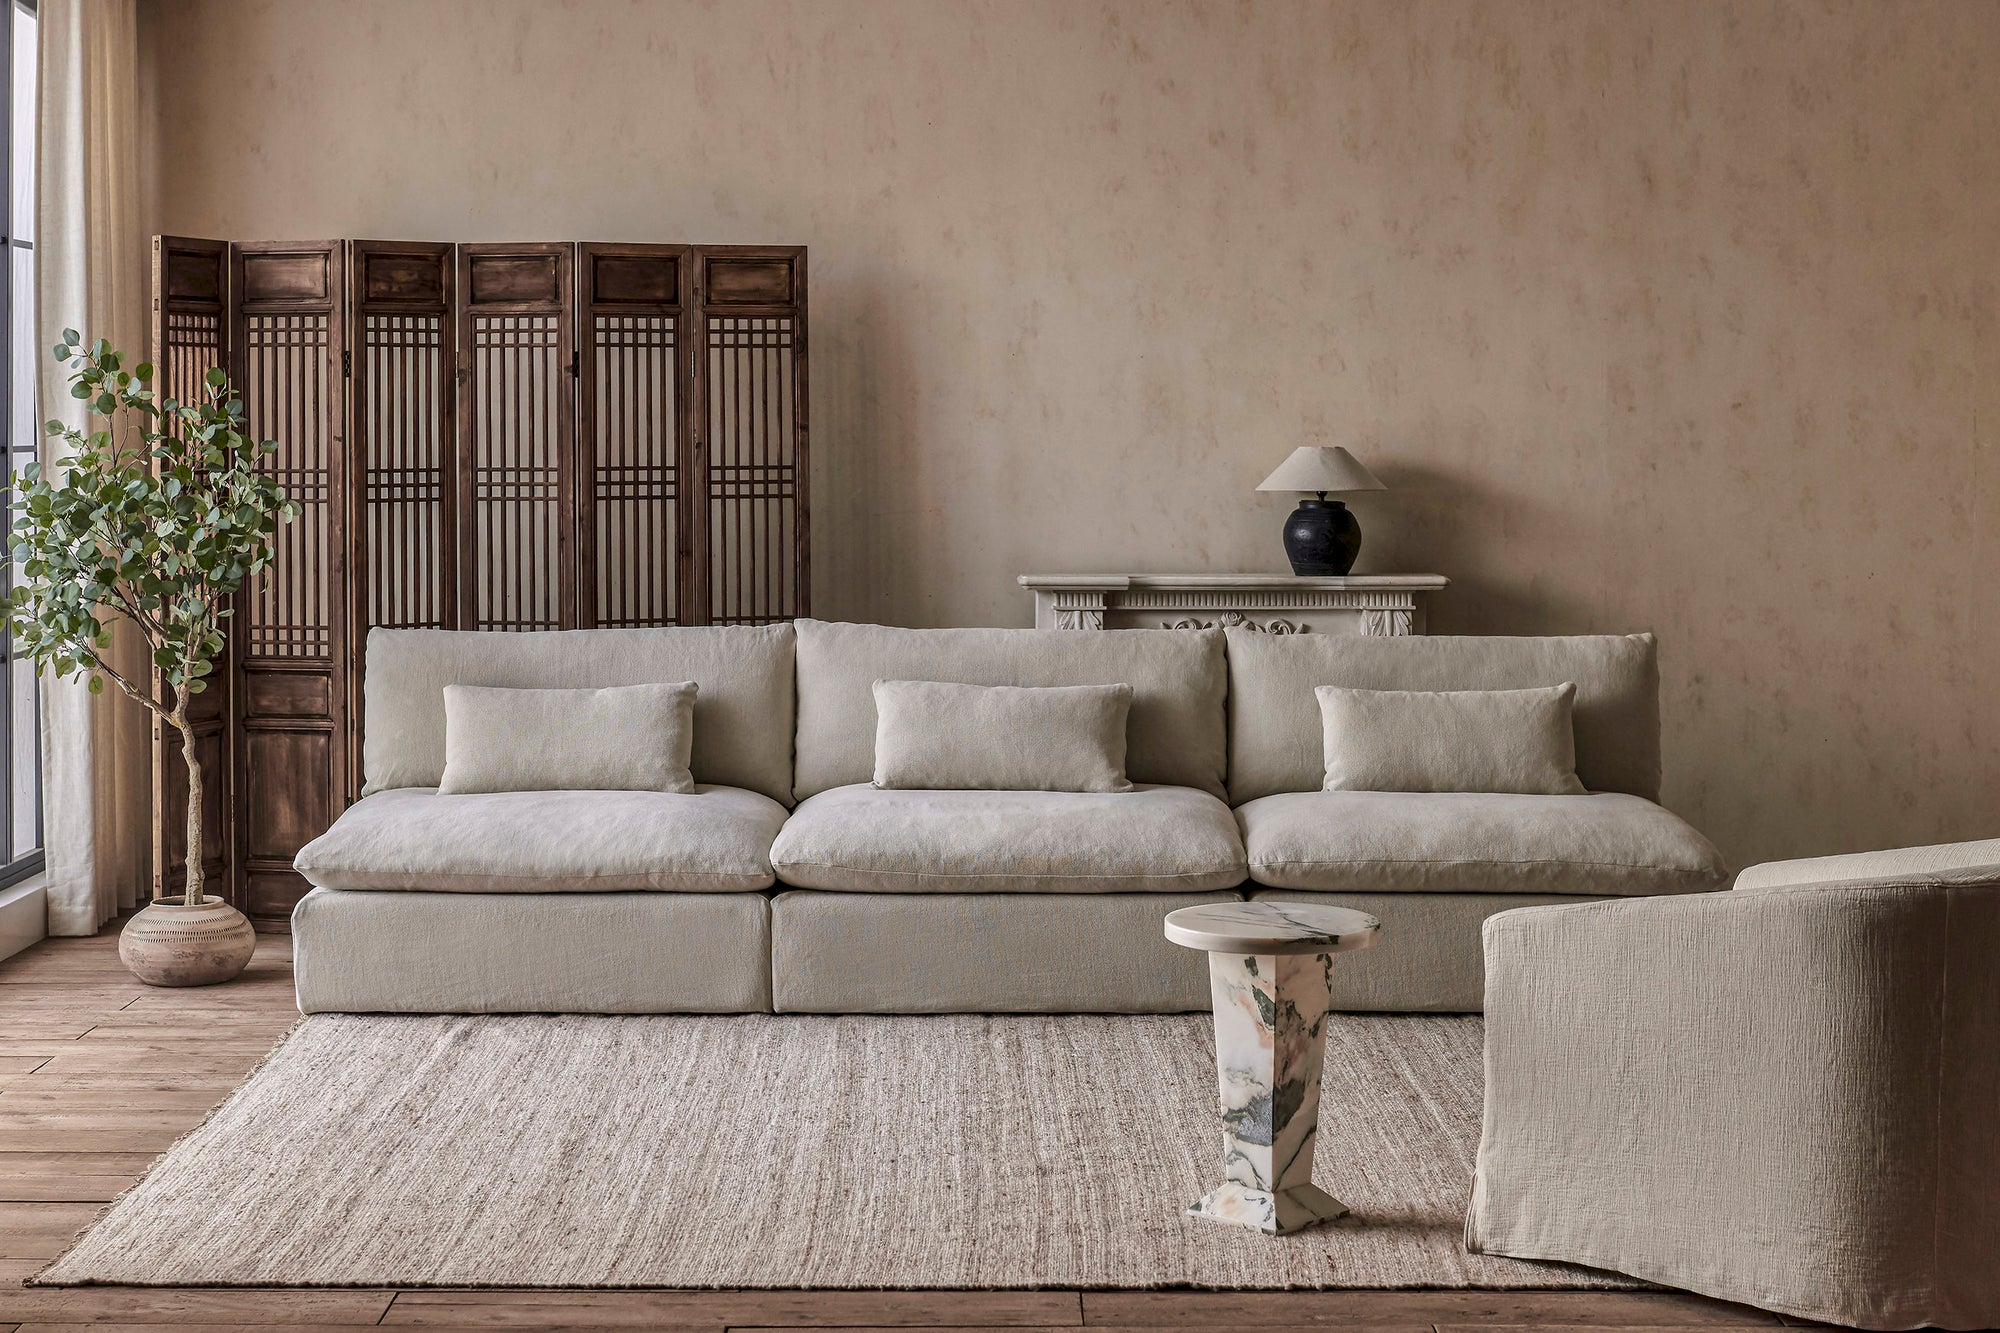 Aria Grande Sectional Sofa in Warm Oatmeal, a light warm beige Medium Weight Linen, placed in a room alongside the Ziki Chair and home decor